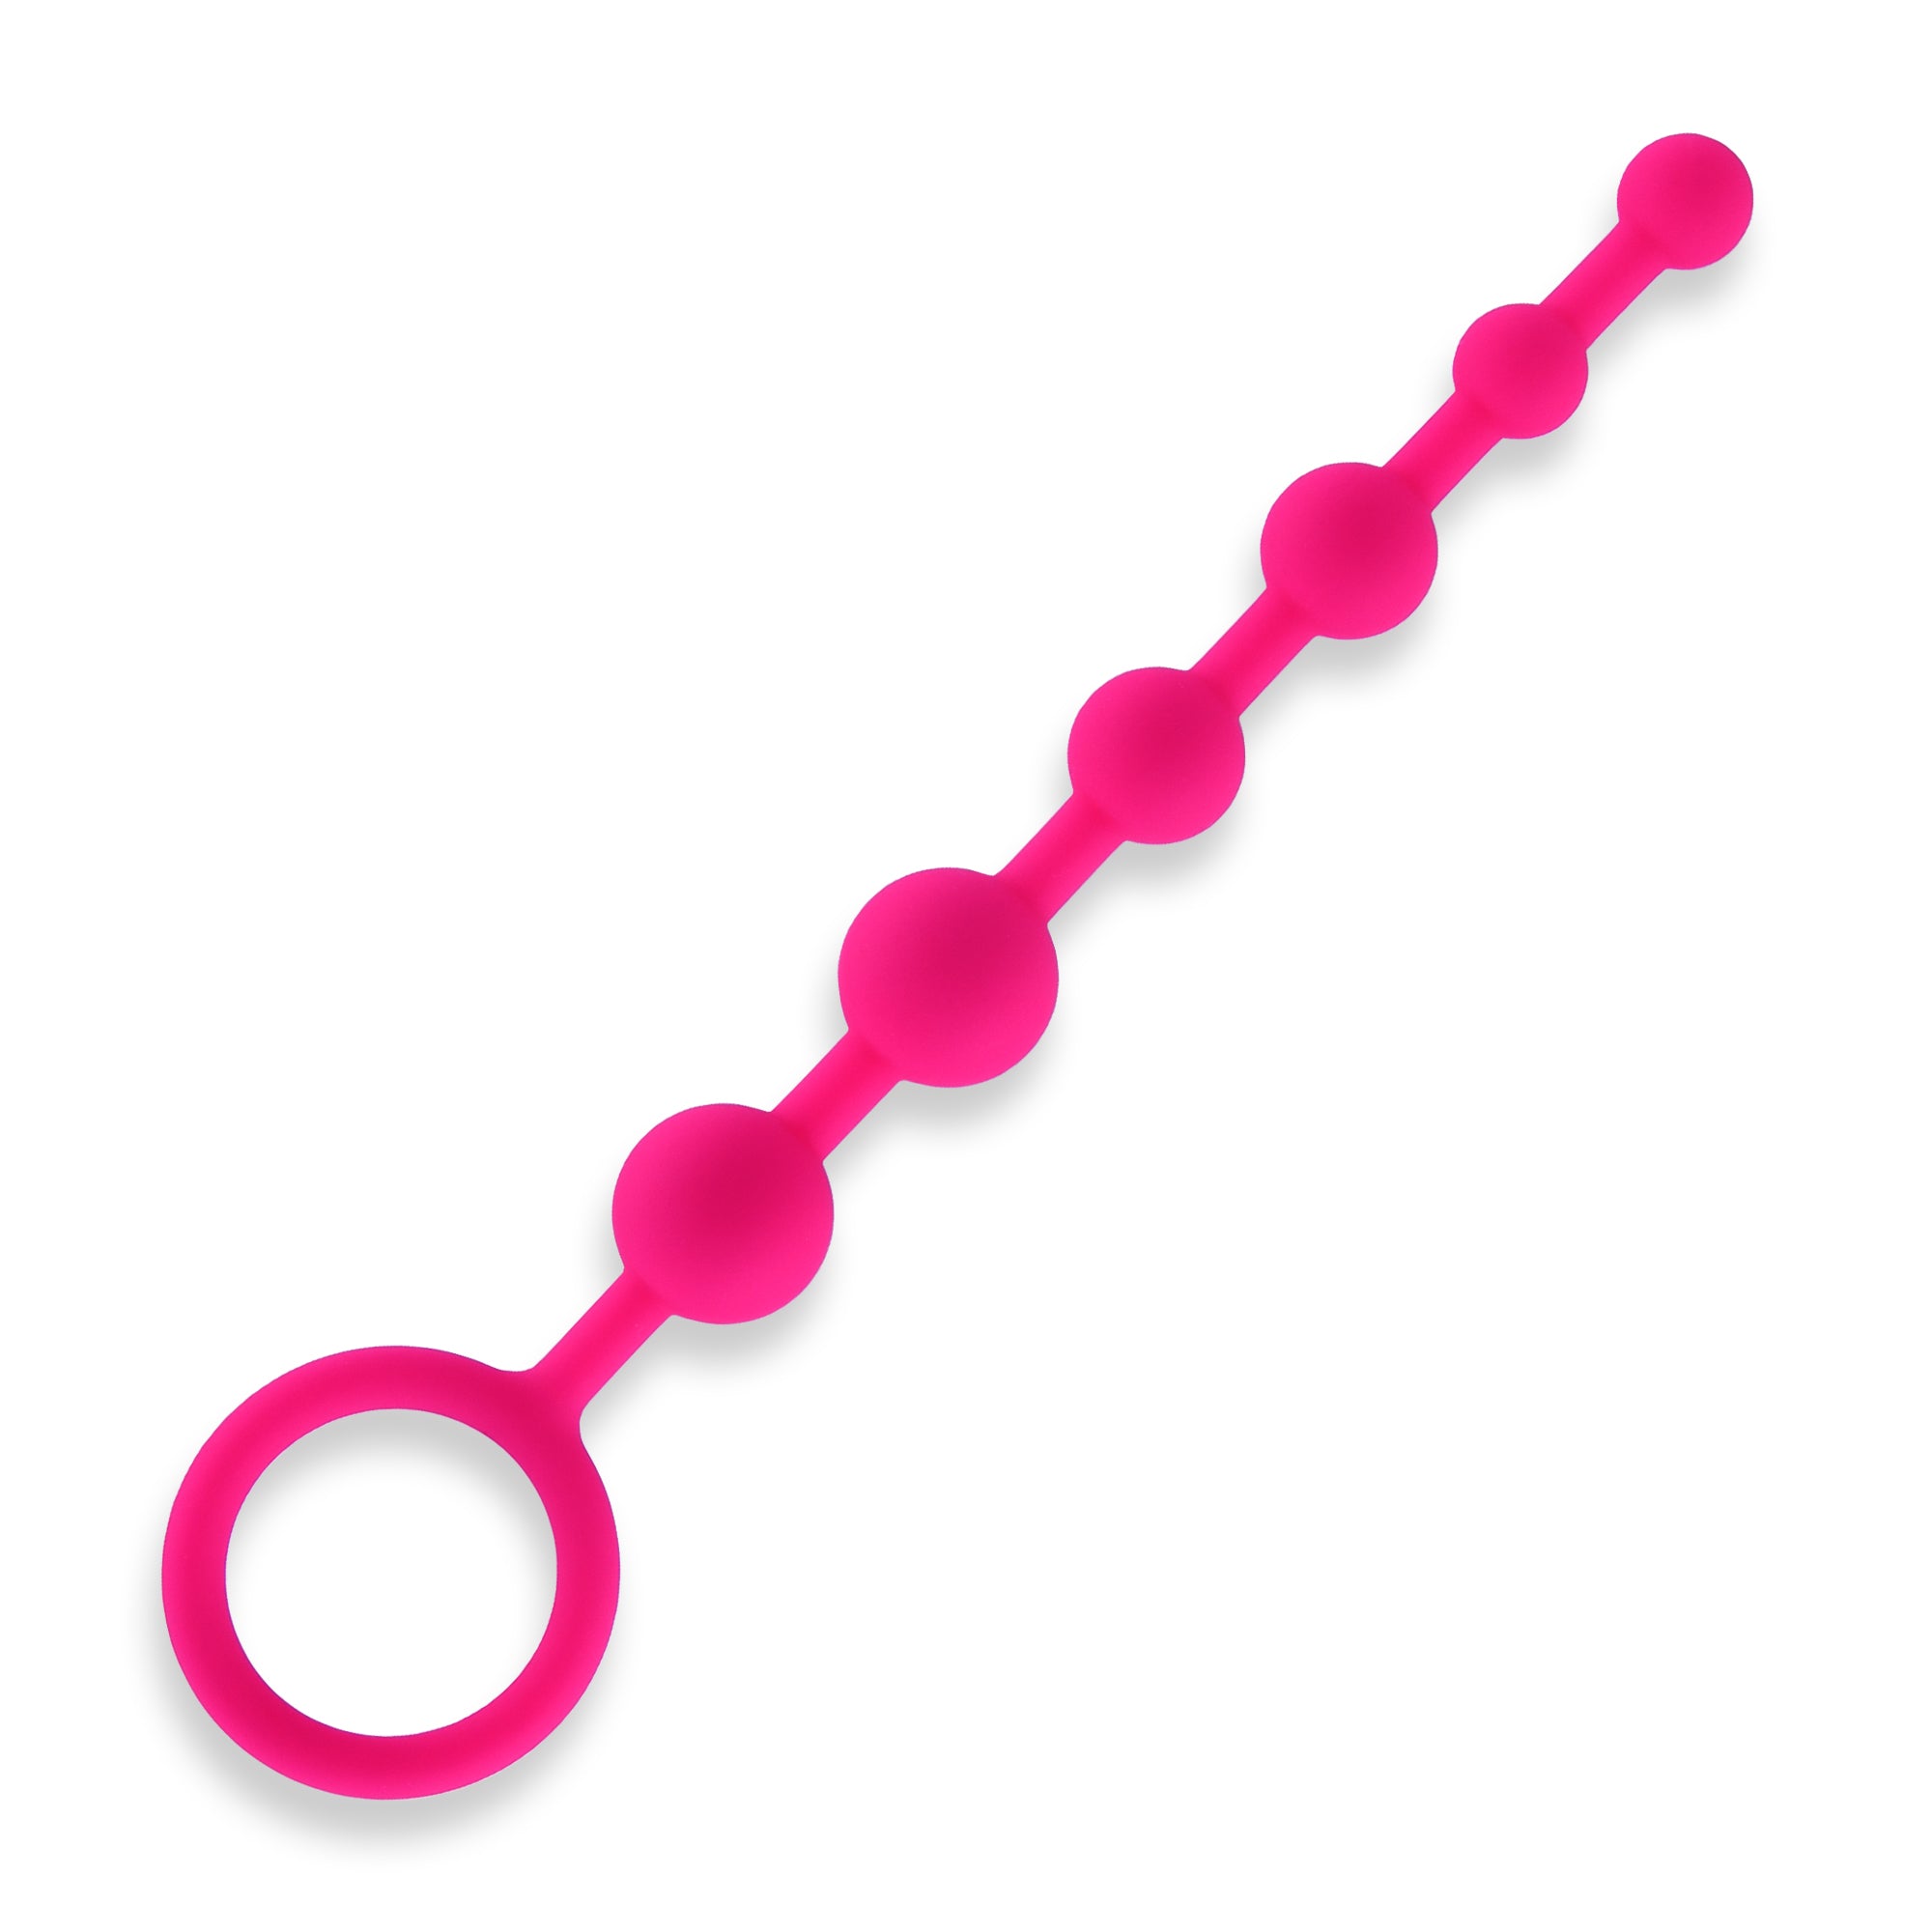 Silicone Anal Beads 6 Balls - Pink